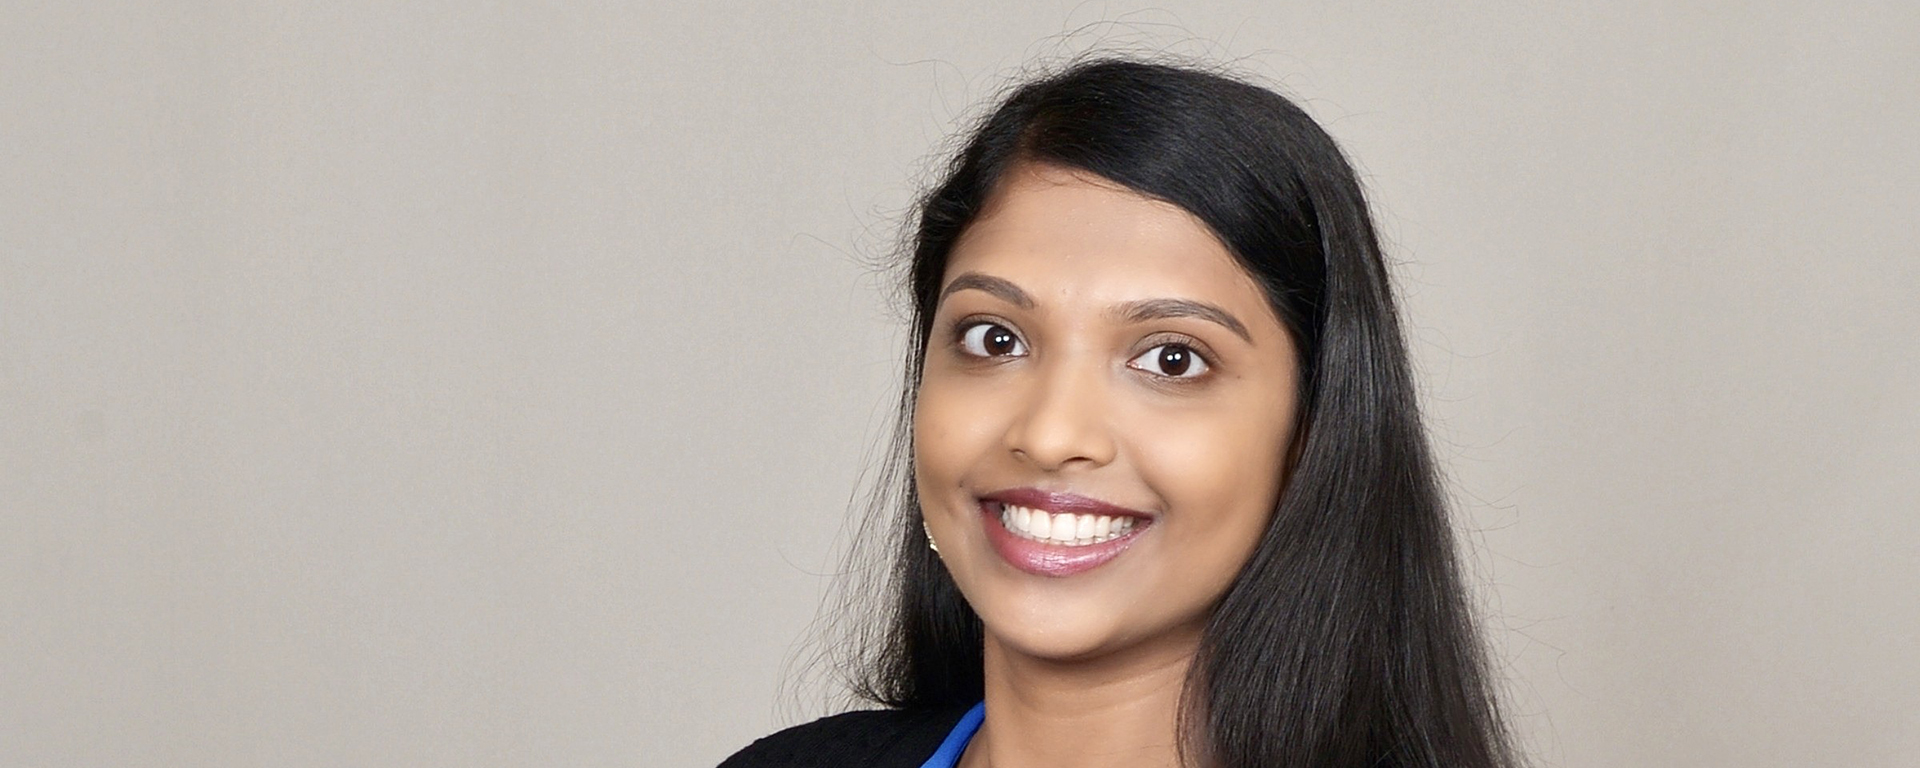 Usha, a Capital One senior data engineer, uses her passion in tech to innovate and solve real problems